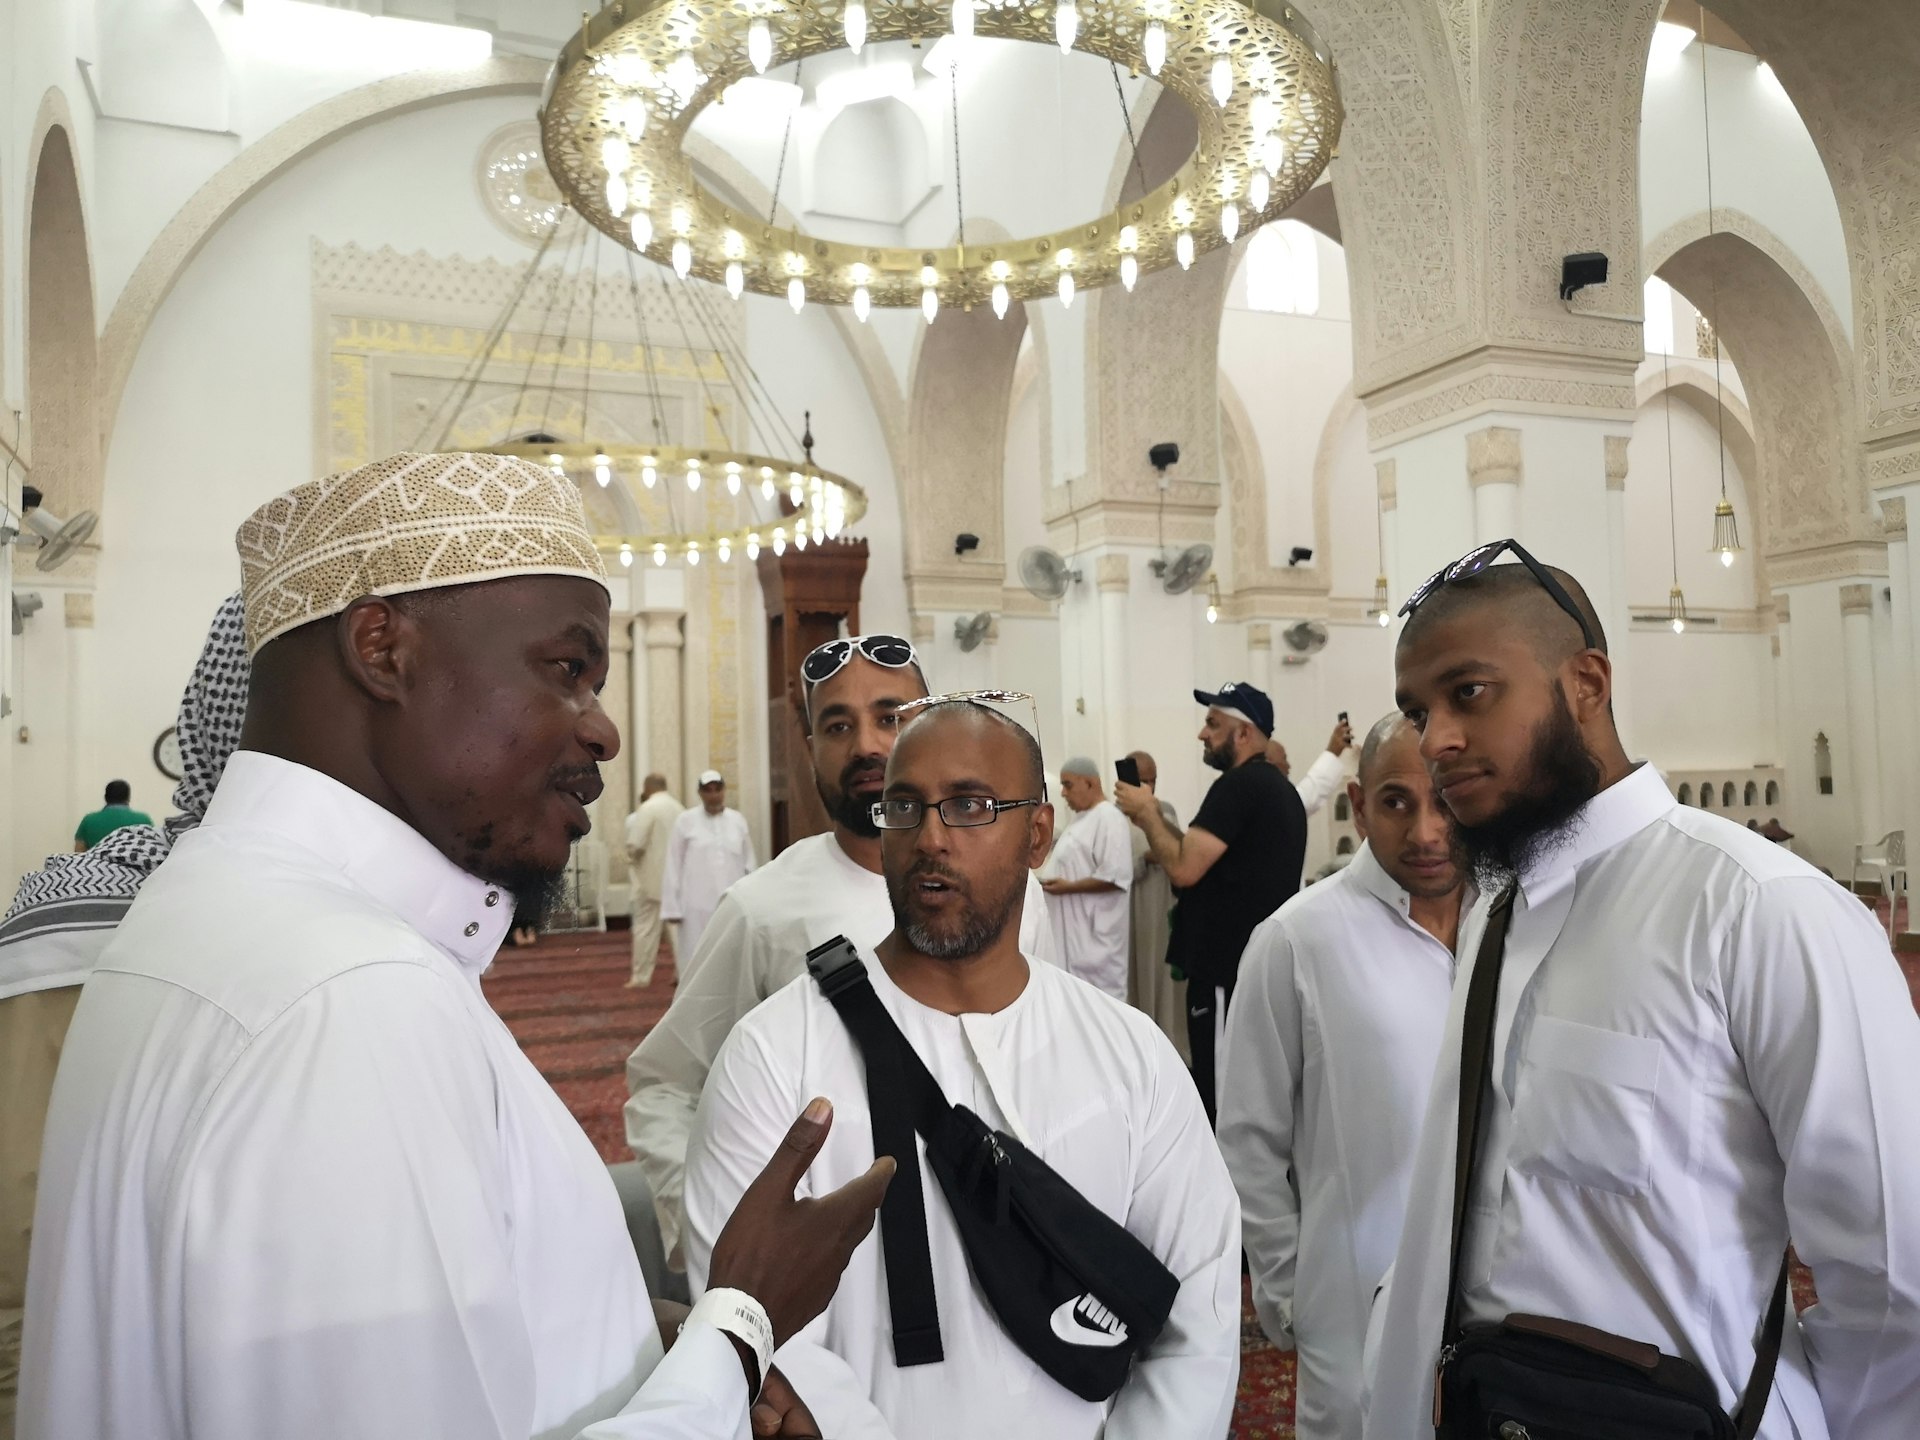 Sheikh Suleiman speaks with a group of Hajjis within the mosque